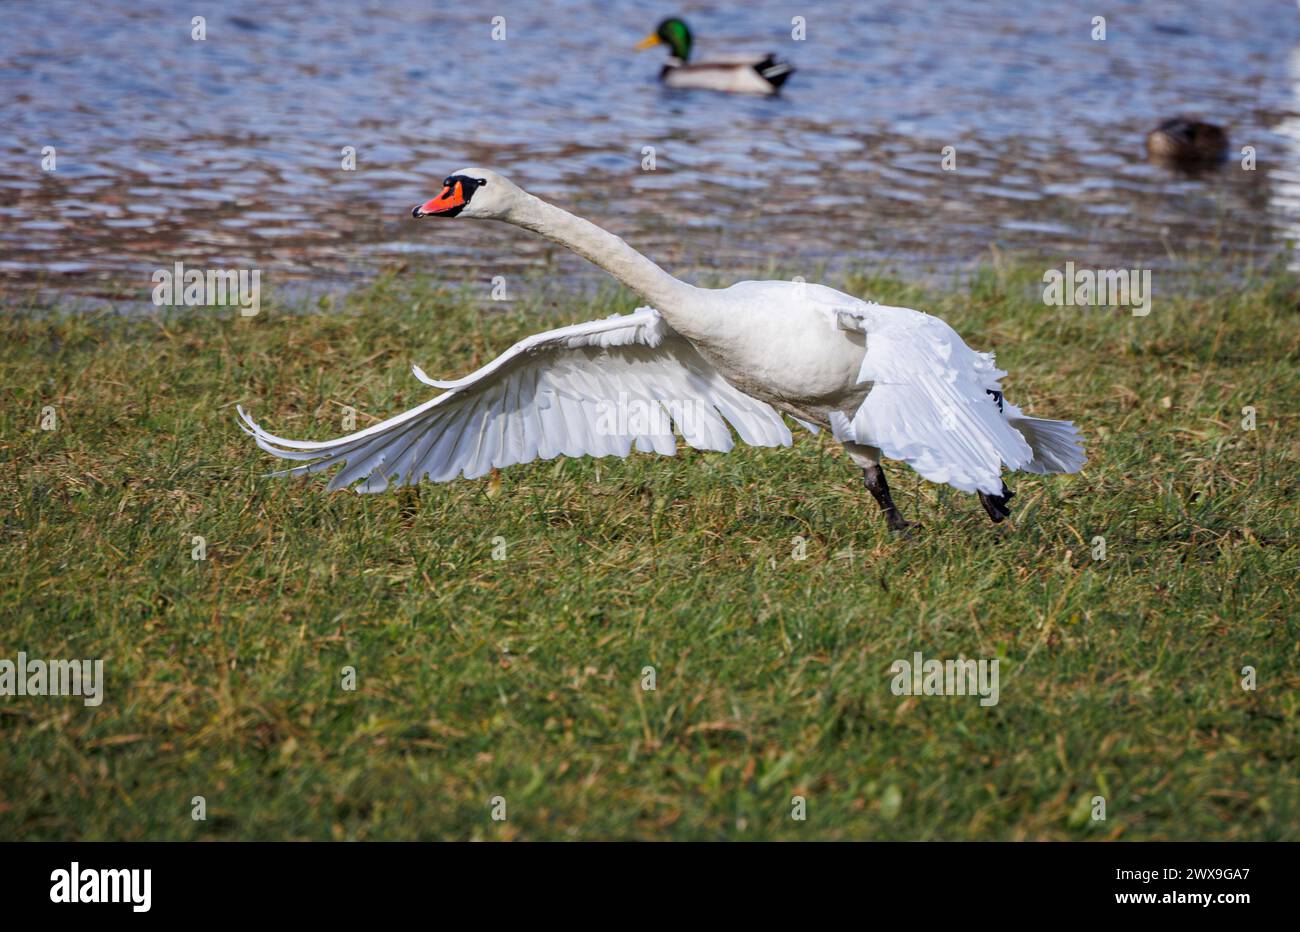 white swan on the grass, start to takeoff with wide open wings Stock Photo